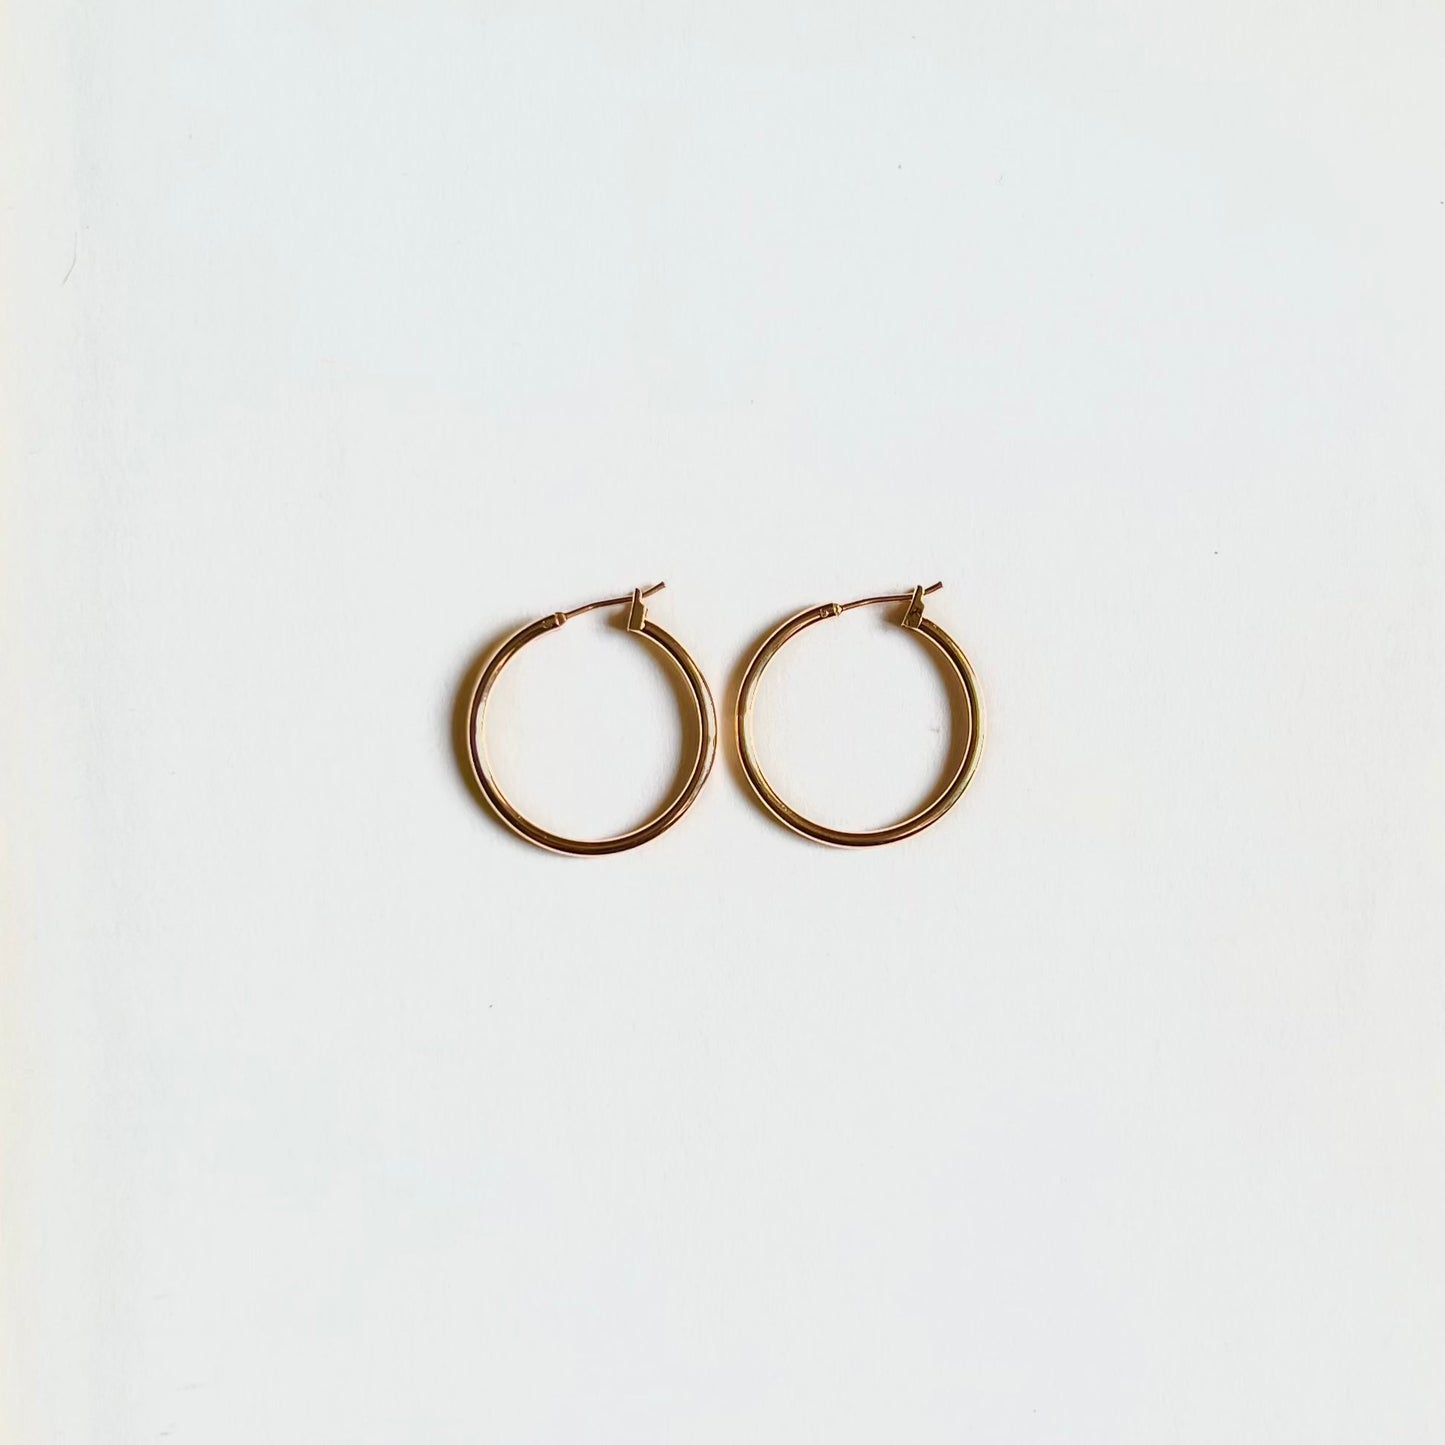 A top view angle of Jane hoops, photographed on a white background.